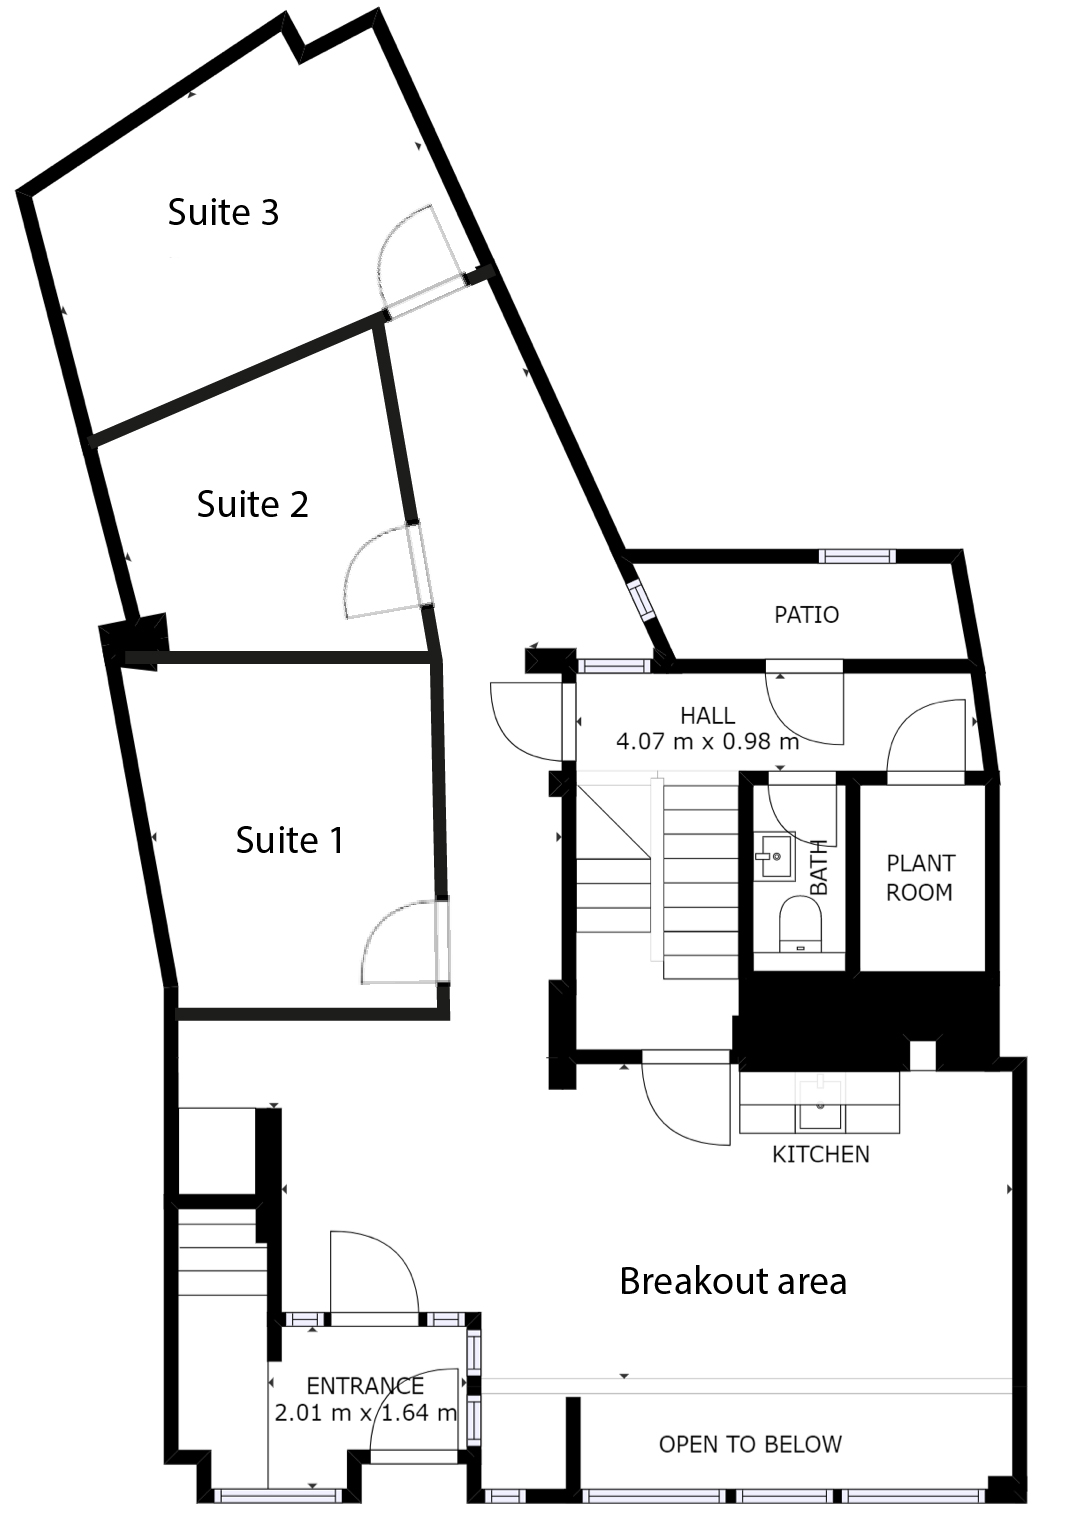 Merchant House Ground floor plan with coworking offices, coworking meeting room and private office suites in Abingdon. 